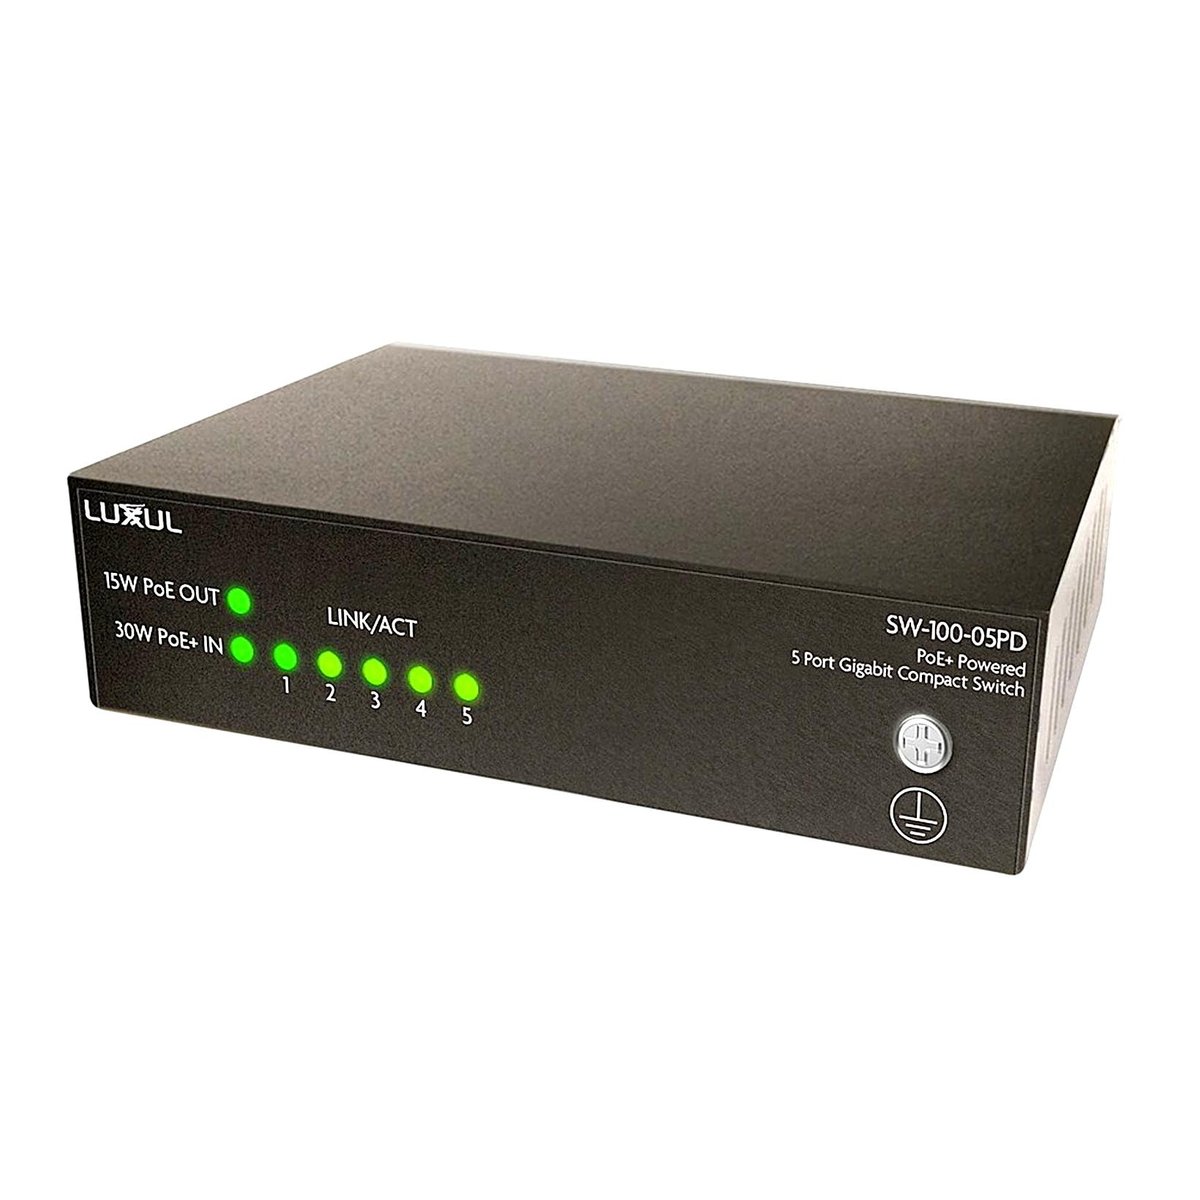 SW-100-05PD | 5 Port Gb Switch Powered By Poe+, No Power Supply